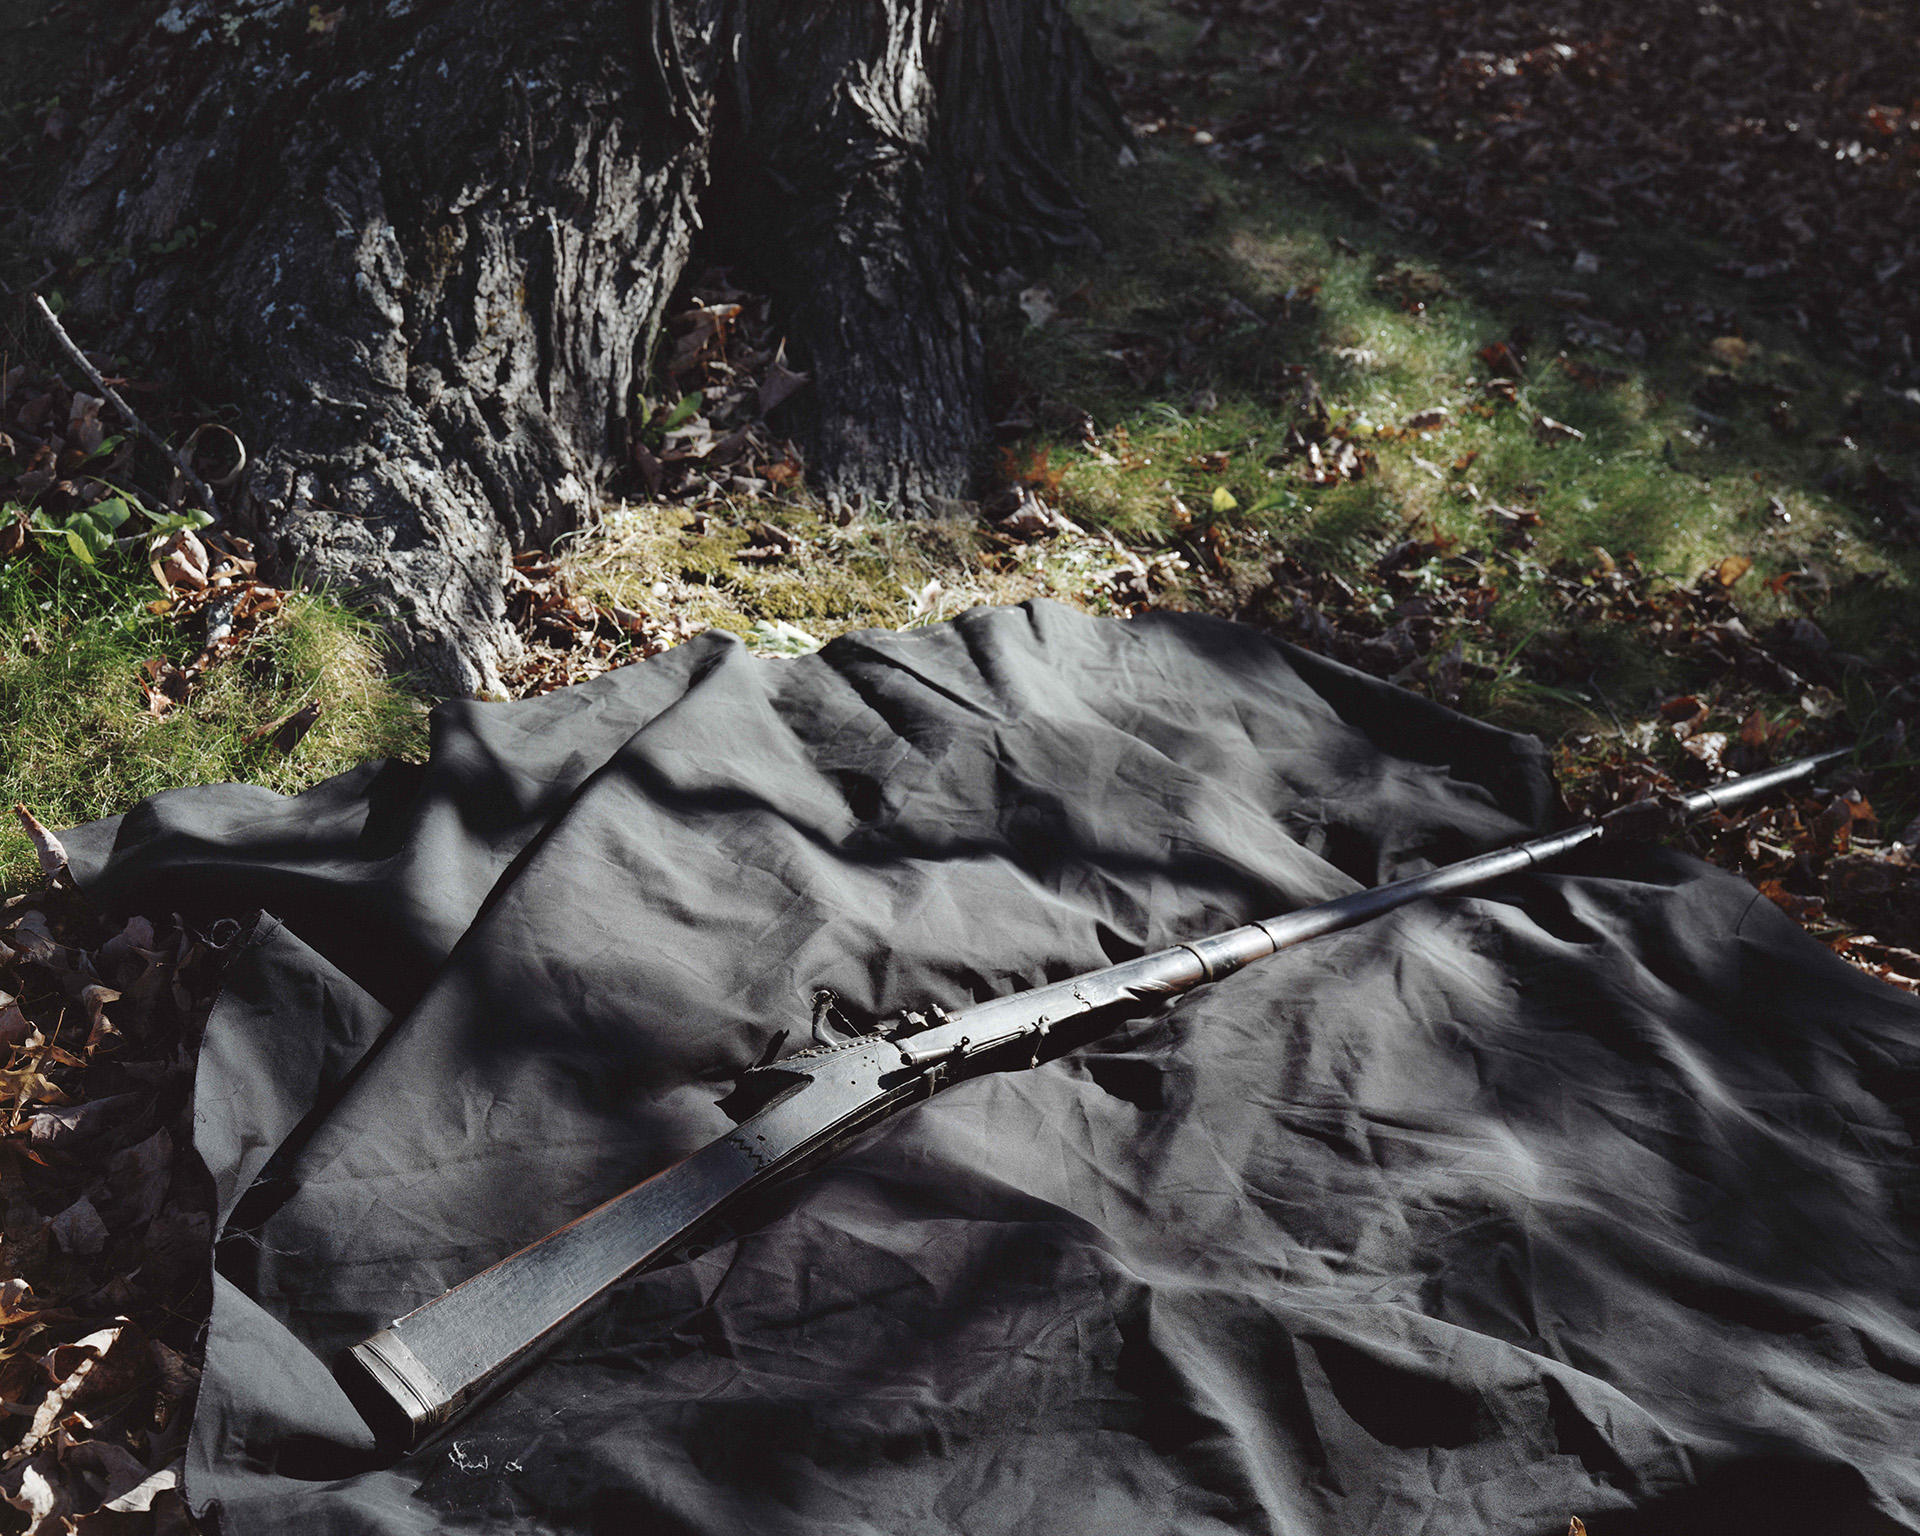 Photograph of a rifle laid on a piece of fabric on grass.